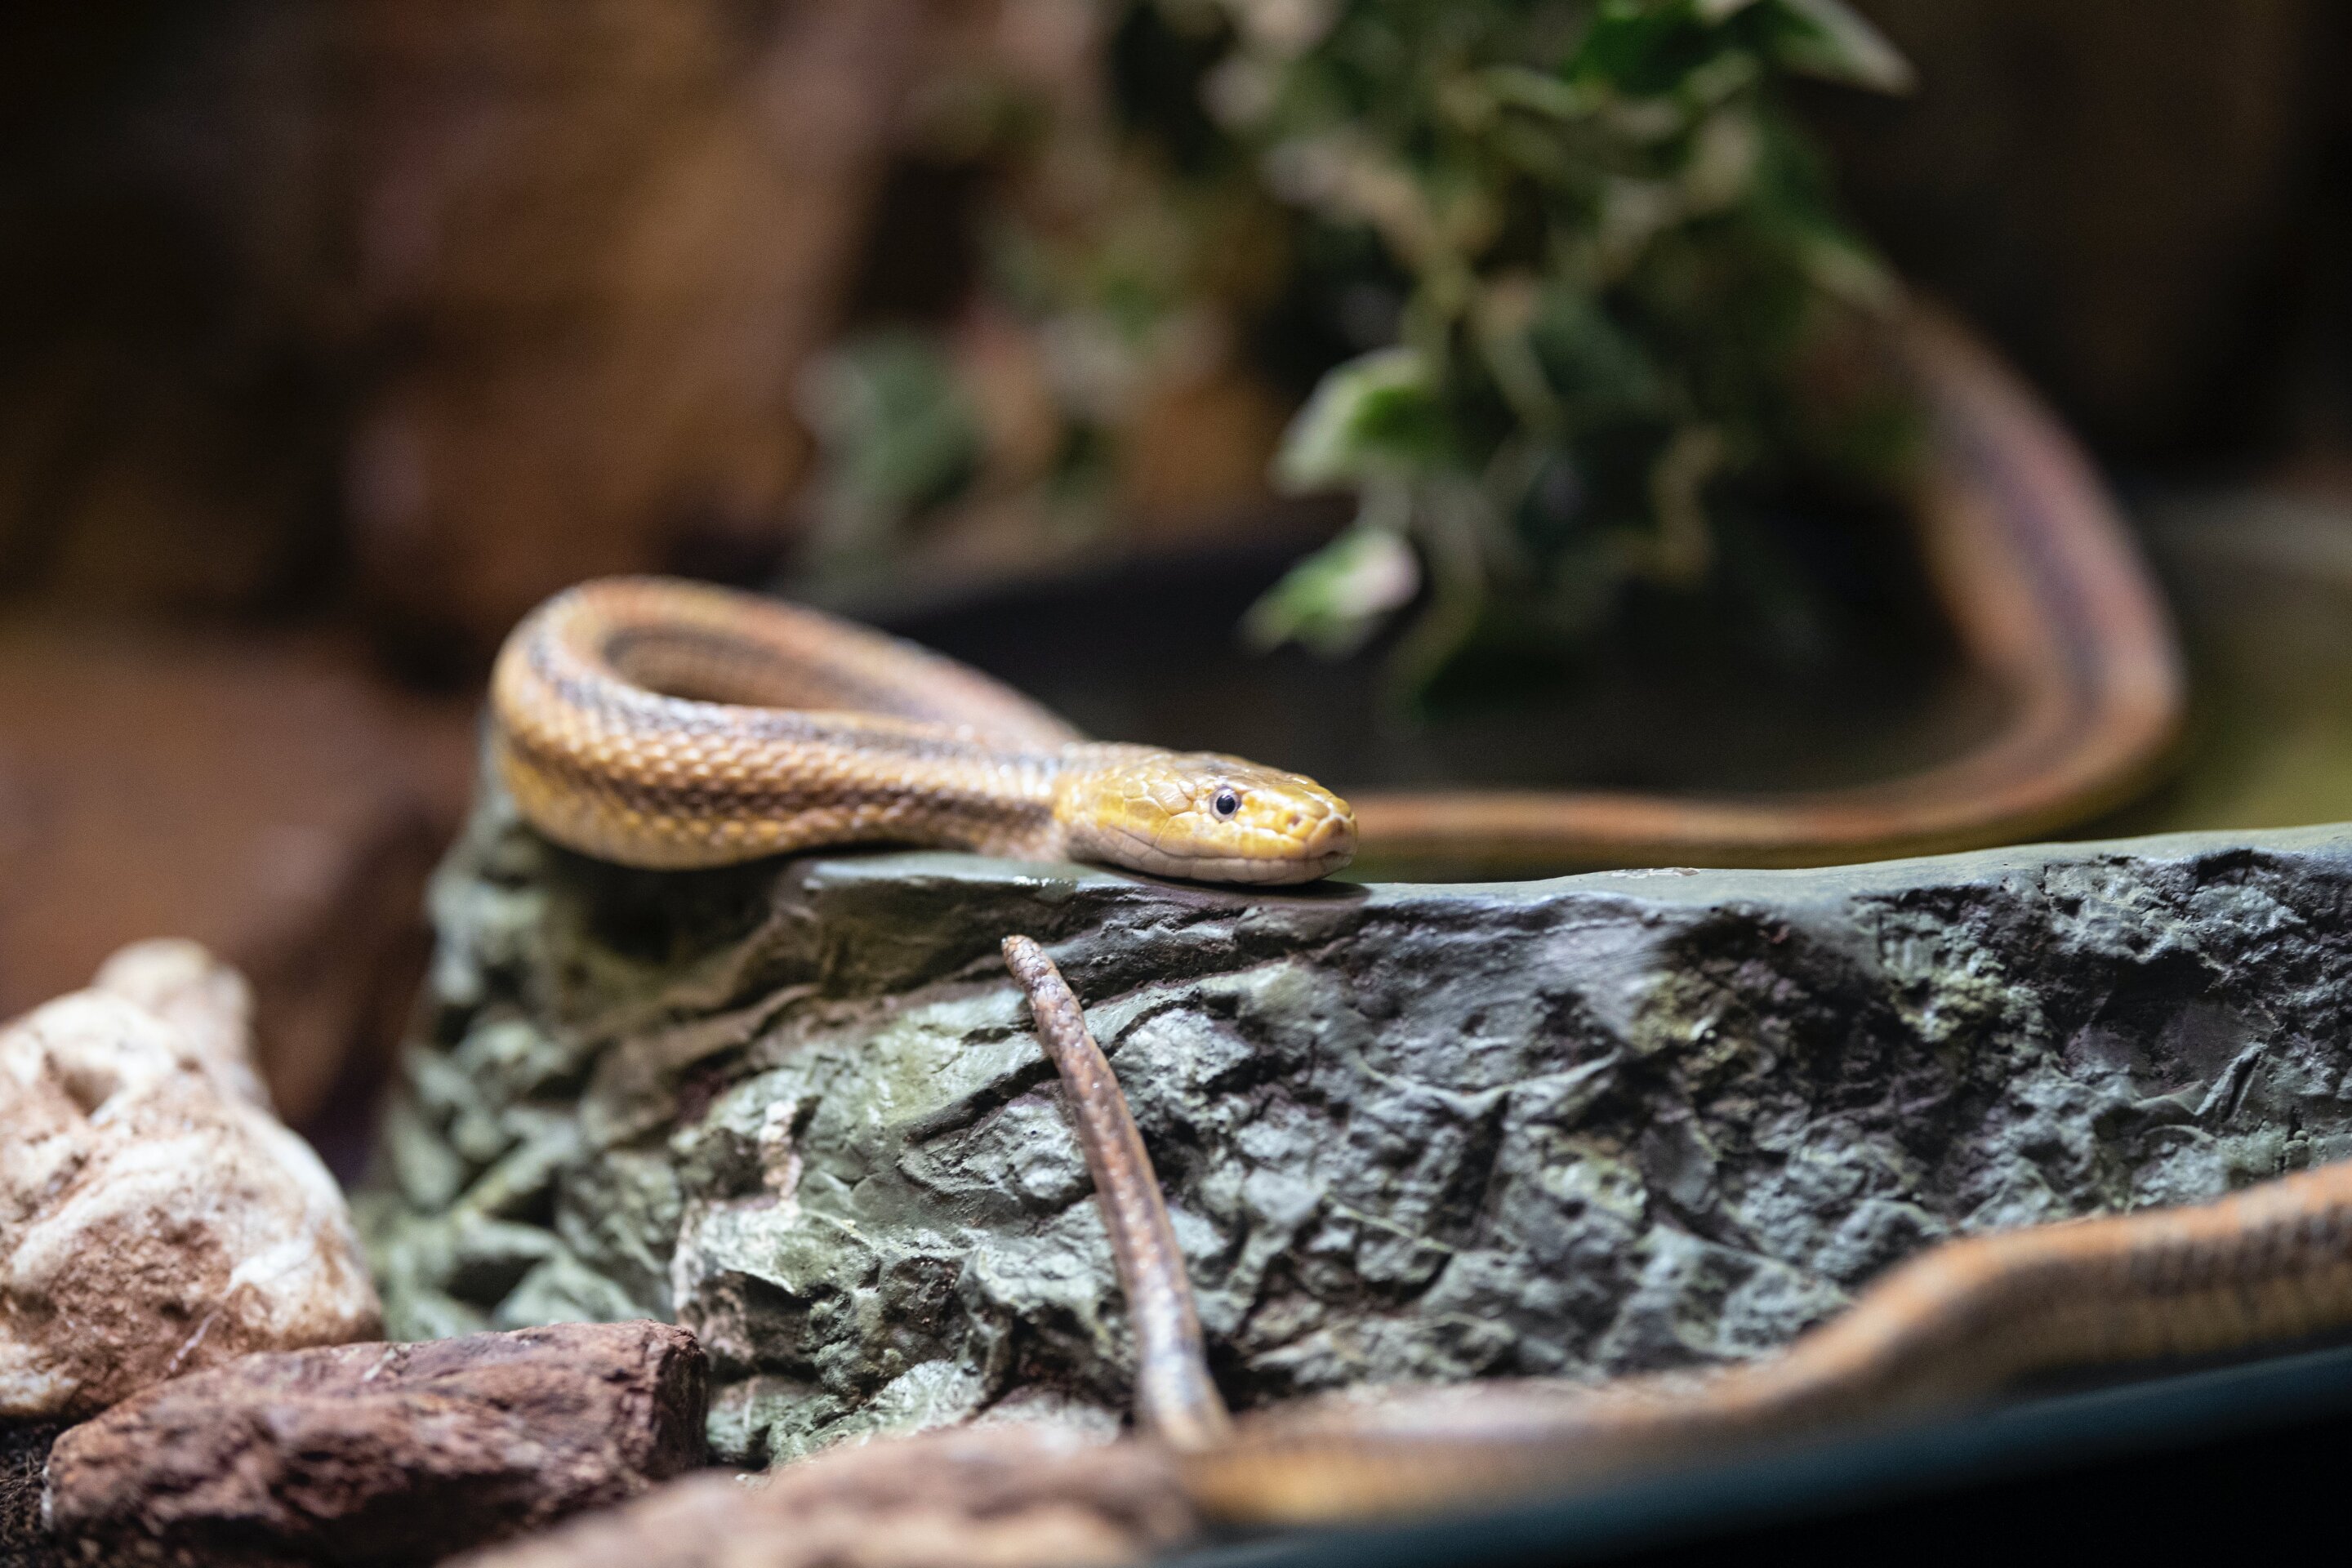 Snake charm: Four reasons to love snakes - Phys.org